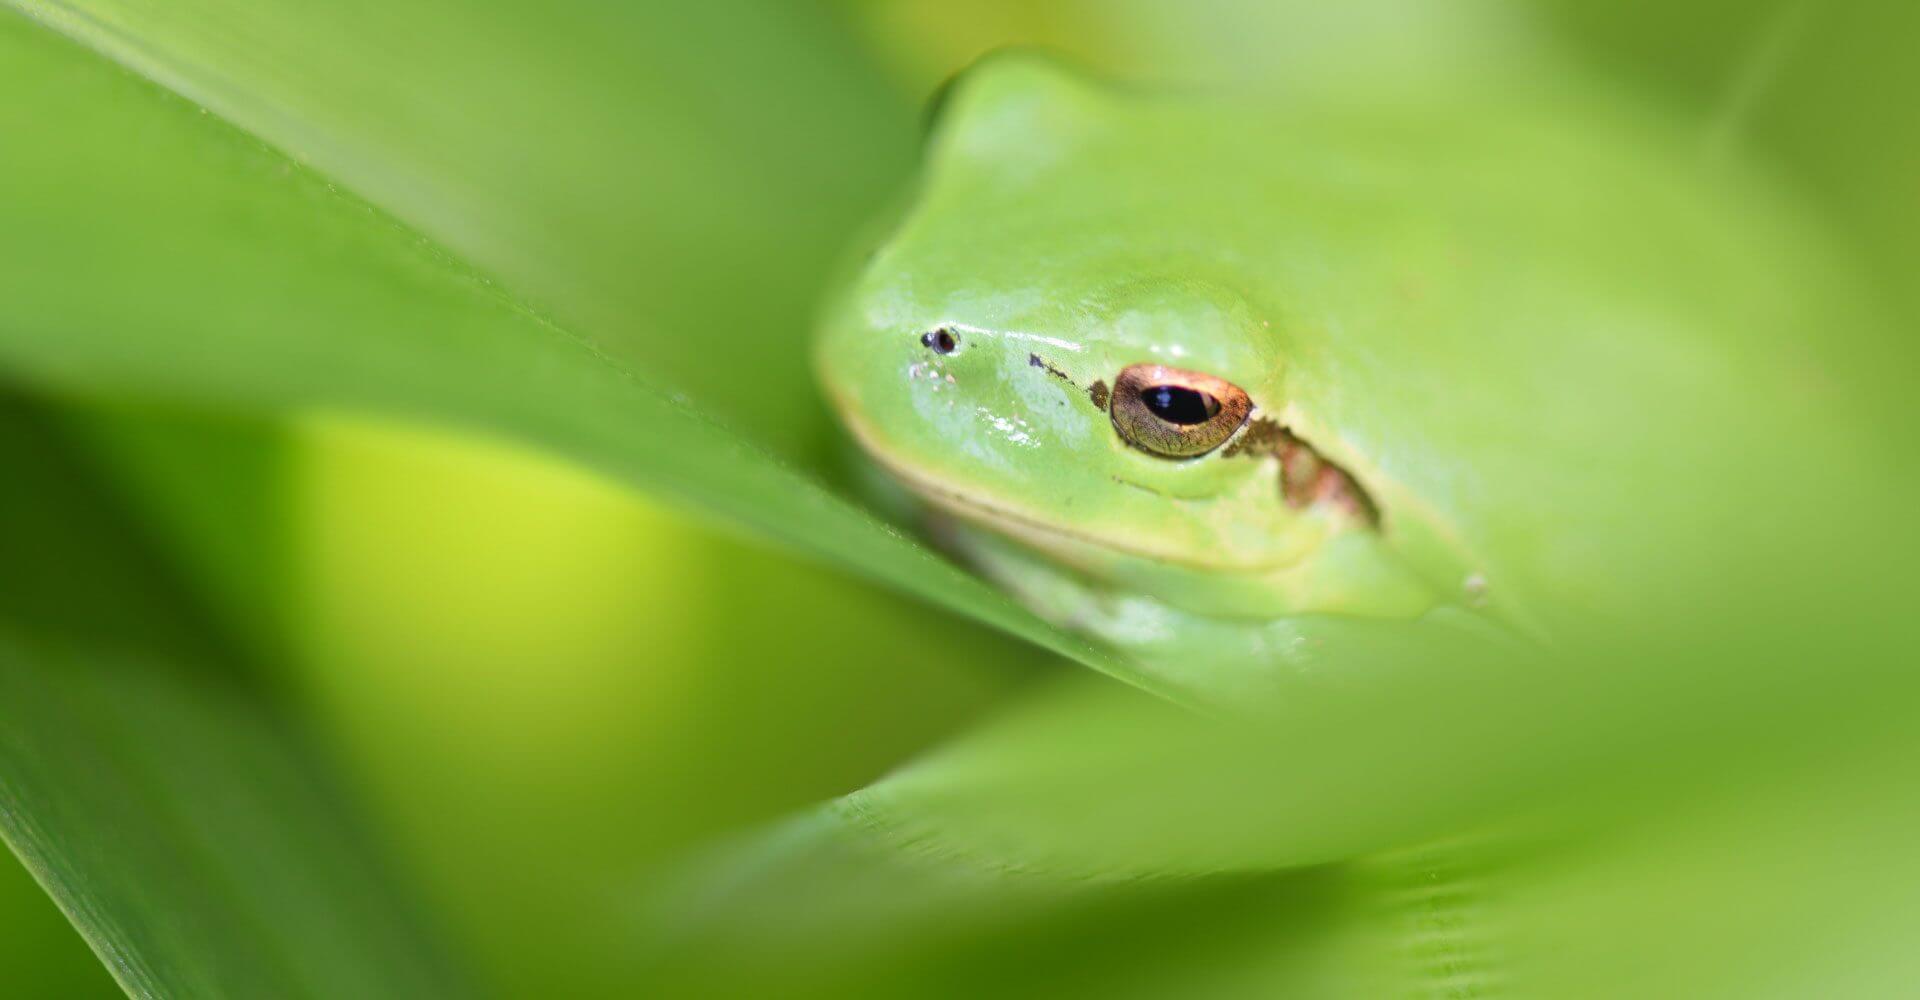 A green frog against bright green leaves, green muni